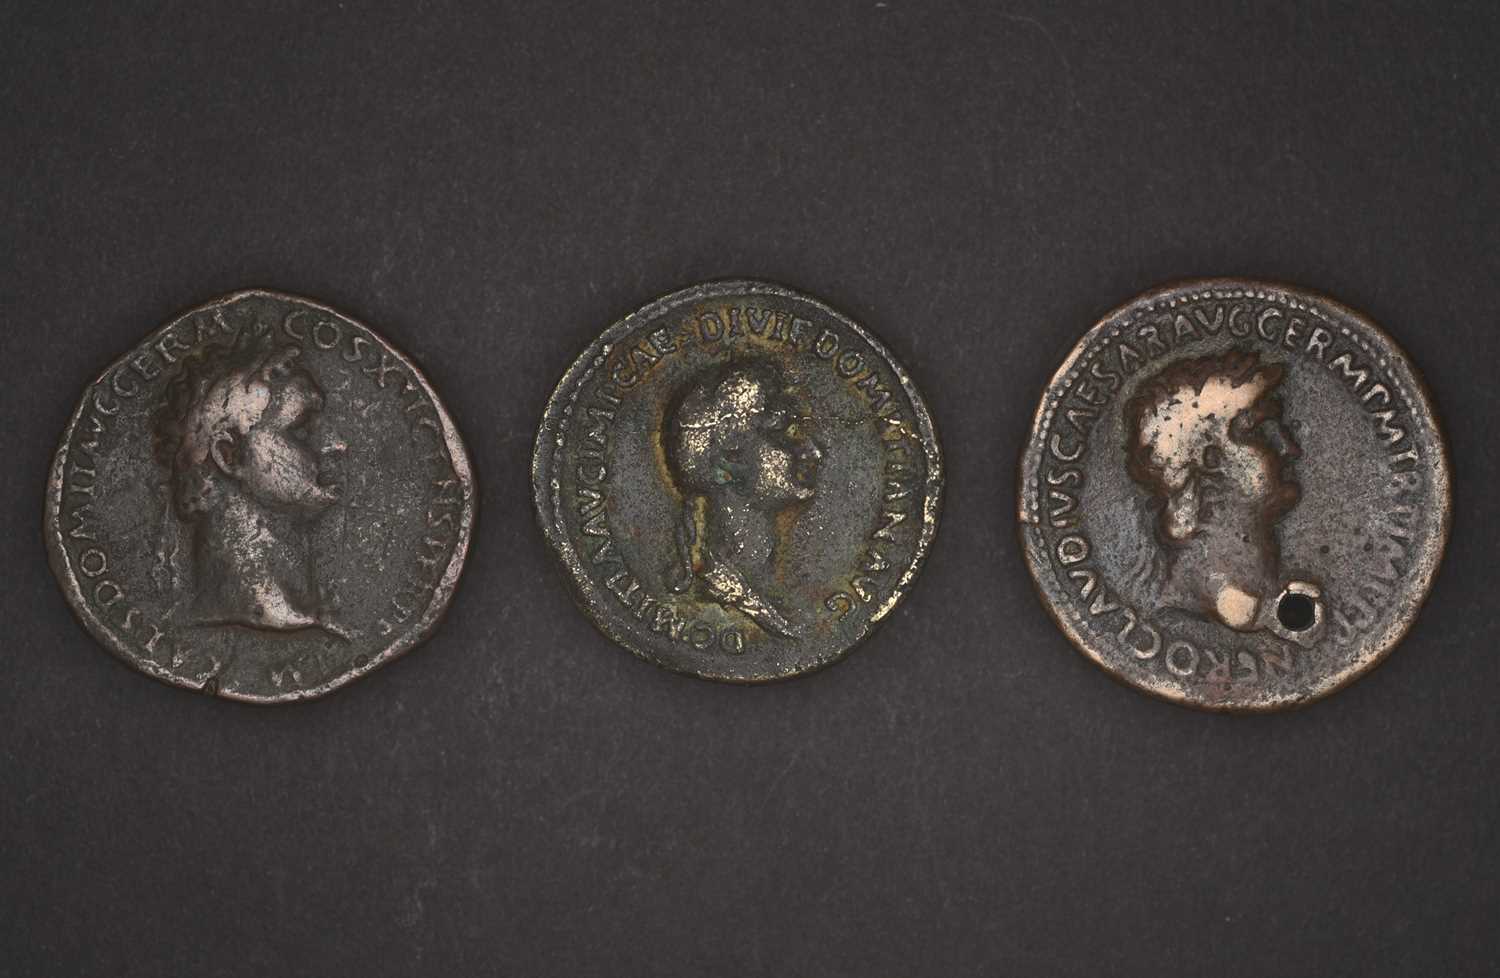 3 x 'Paduan' Medals comprising: (1) Imitation of Domitian (AD 81-96) Sestertius after Giovanni da - Image 3 of 6